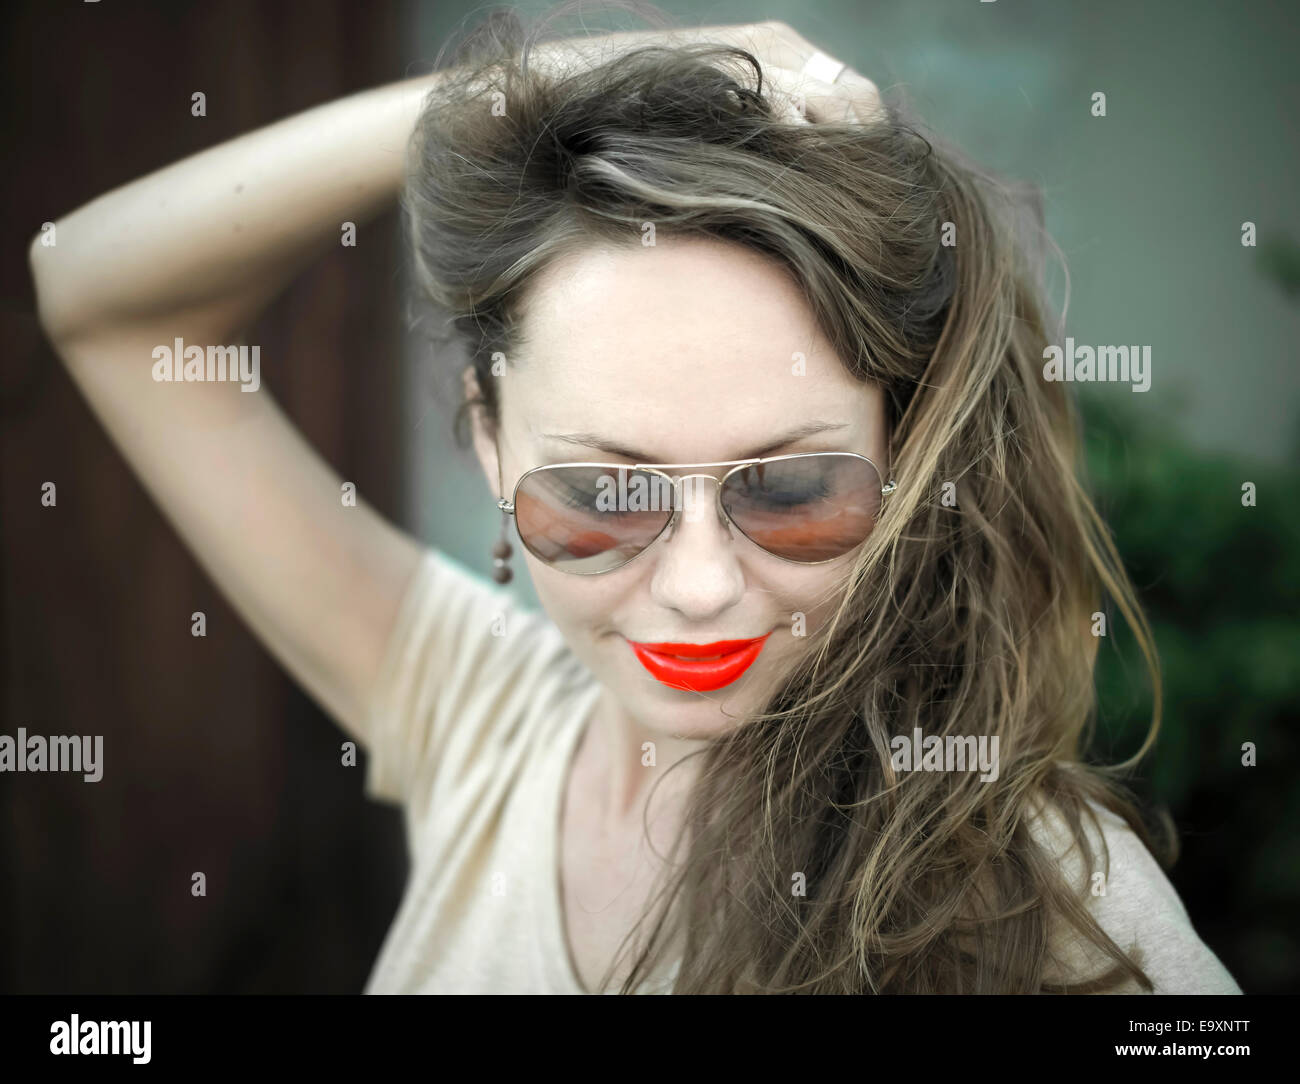 Portrait of Young Beautiful Woman with Red Lips Stock Photo - Alamy